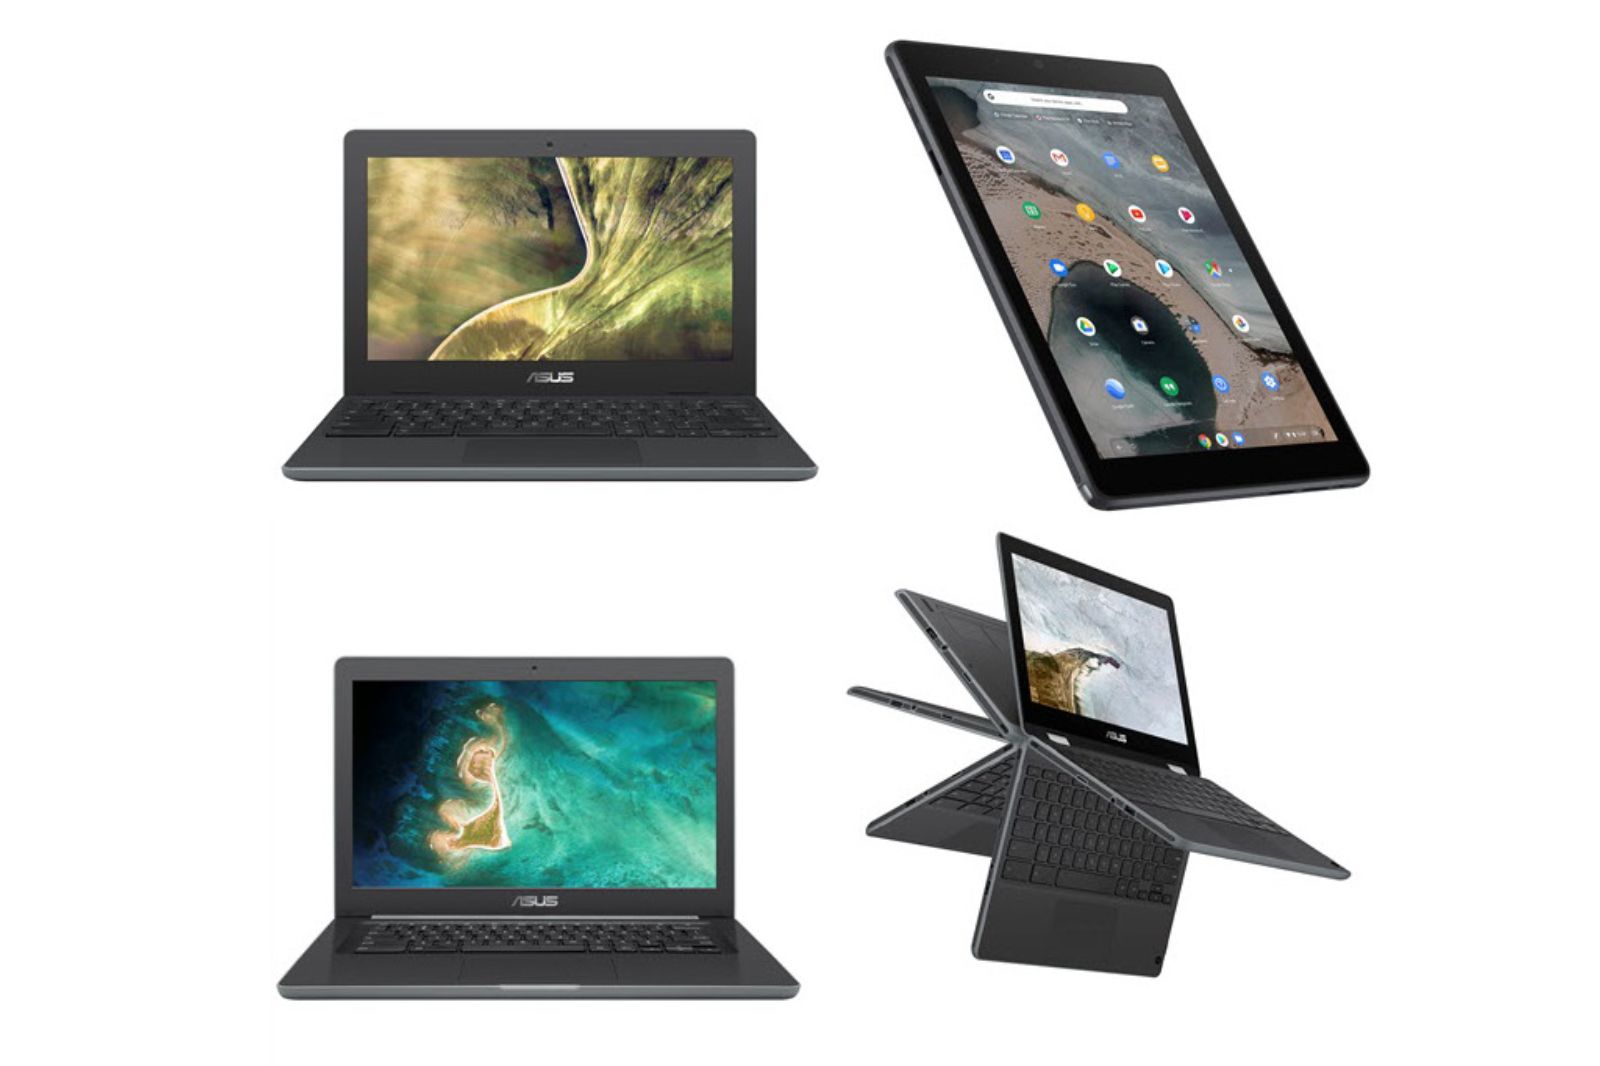 Asus education-ready Chromebook range features new Chromebook Tablet for first time image 1